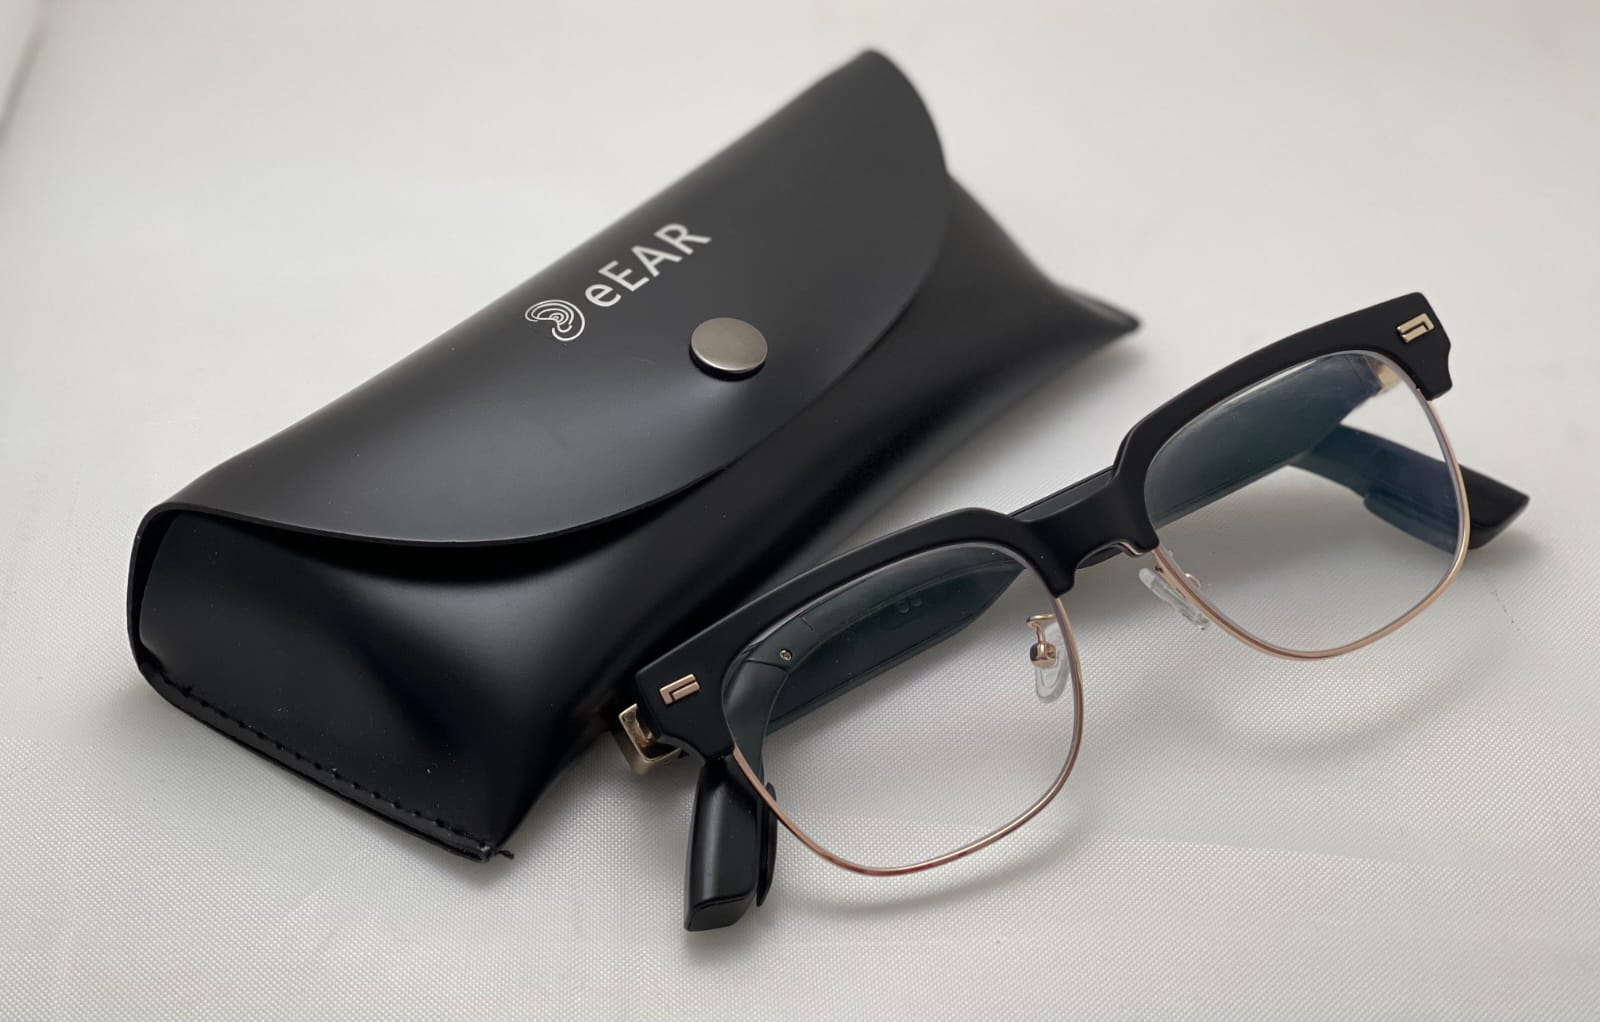 eEAR® eEAR-BTGC-CIC : 3 Functions in One System Bone Conduction optical Sun smart audio glasses sound technically, Rechargeable CIC miniature Hearing aids with Bluetooth technology. Designed and Engineered in the USA